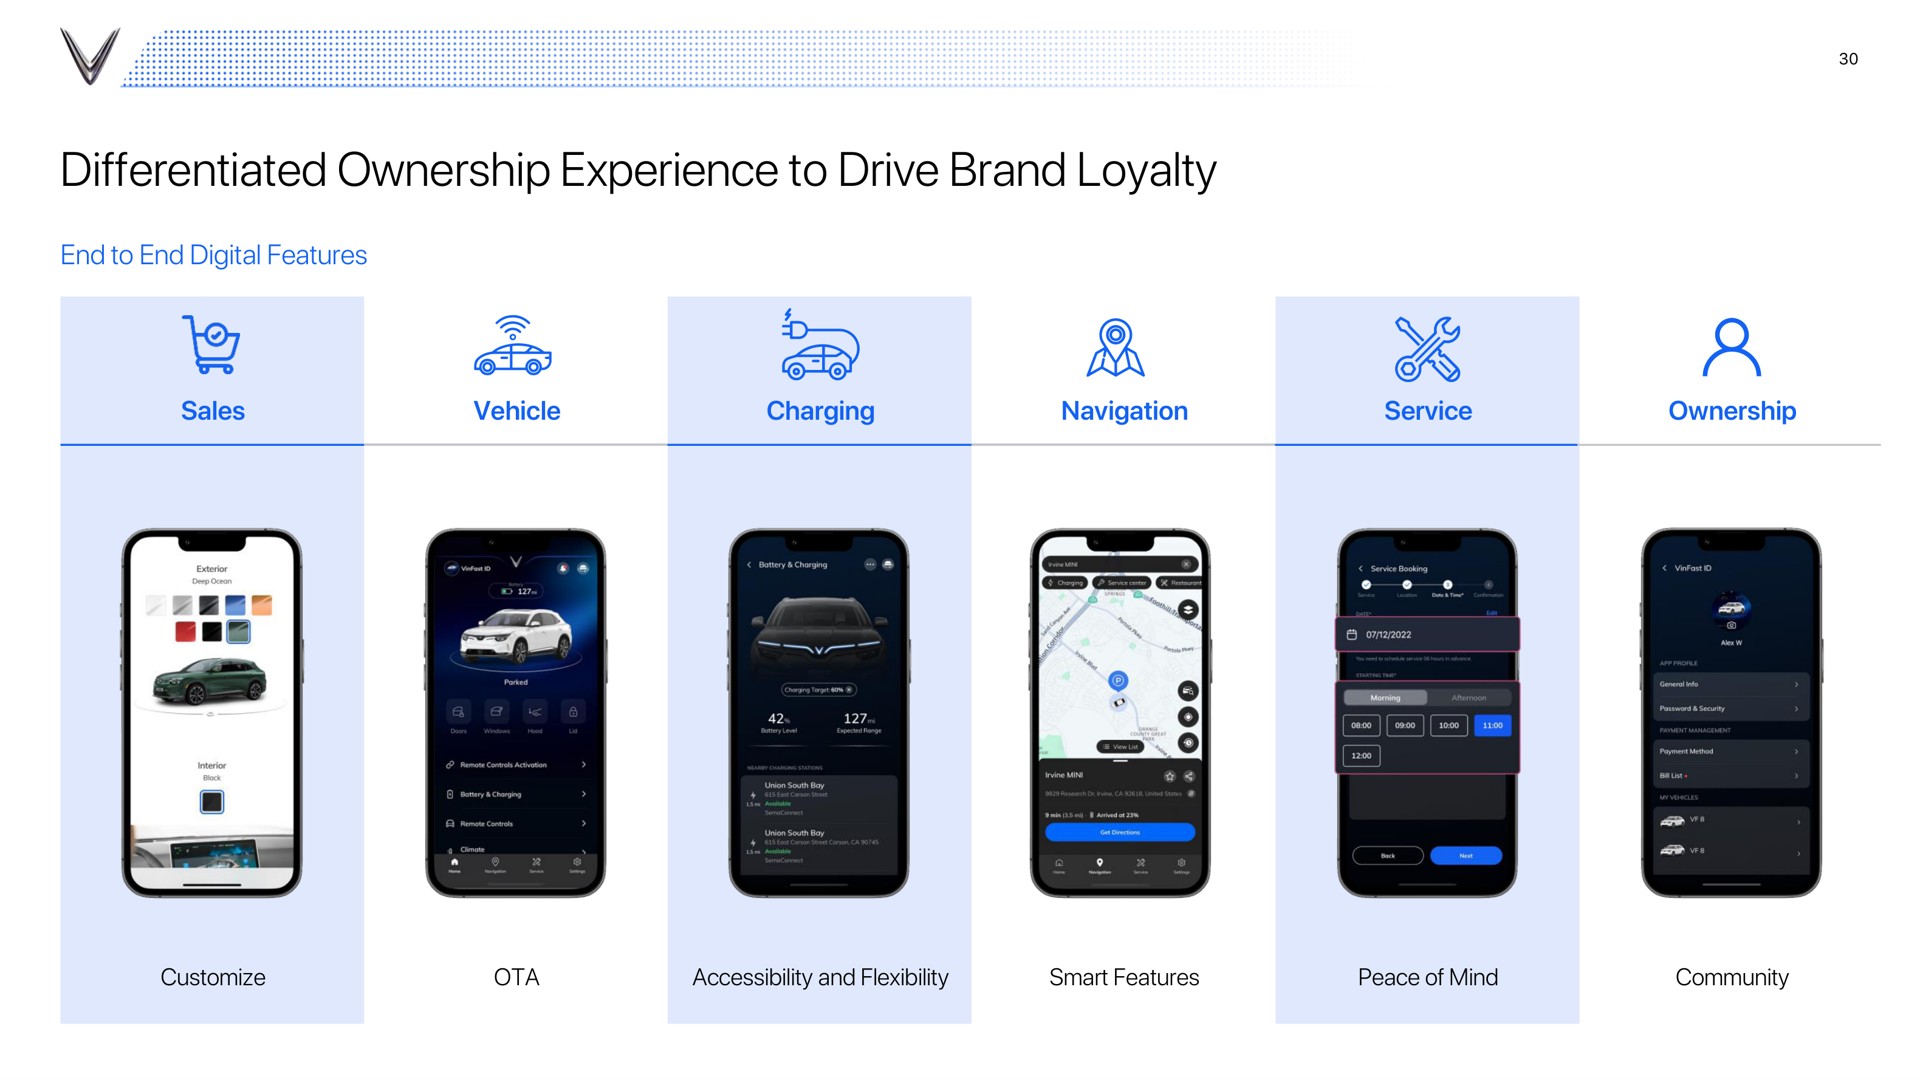 differentiated ownership experience to drive brand loyalty as | VinFast